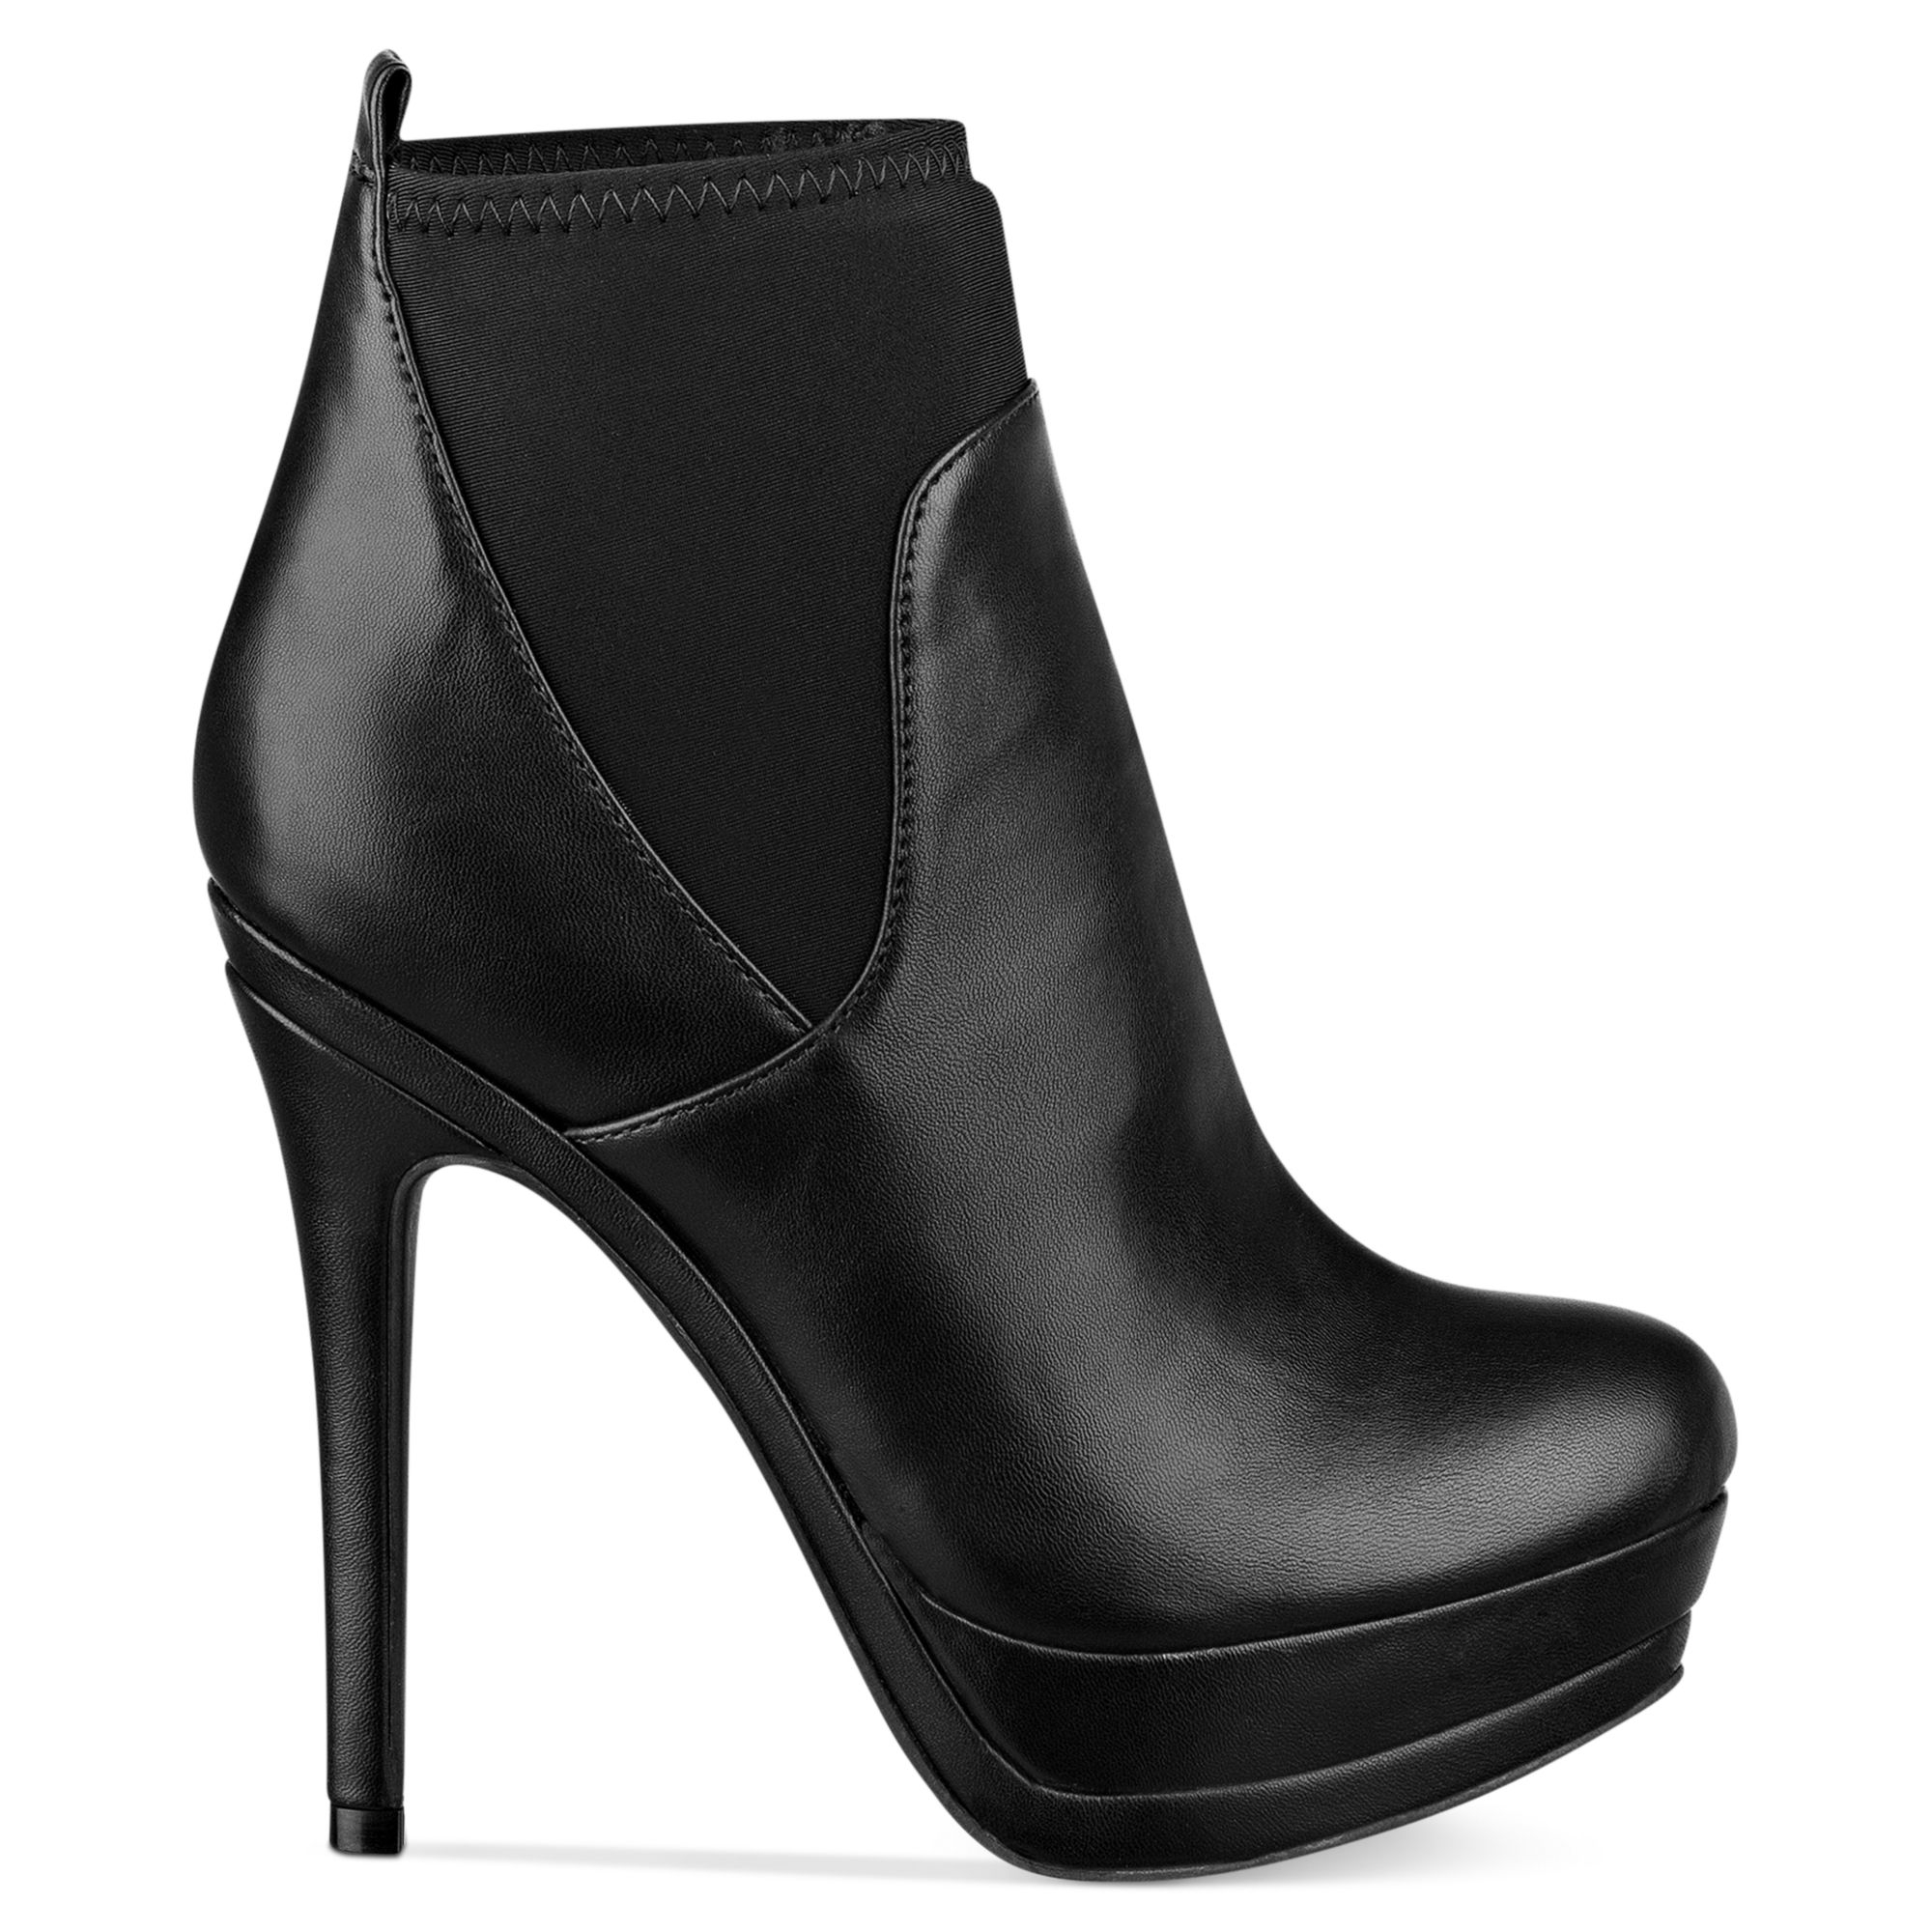 Lyst - G By Guess Ellyna Platform Booties in Black